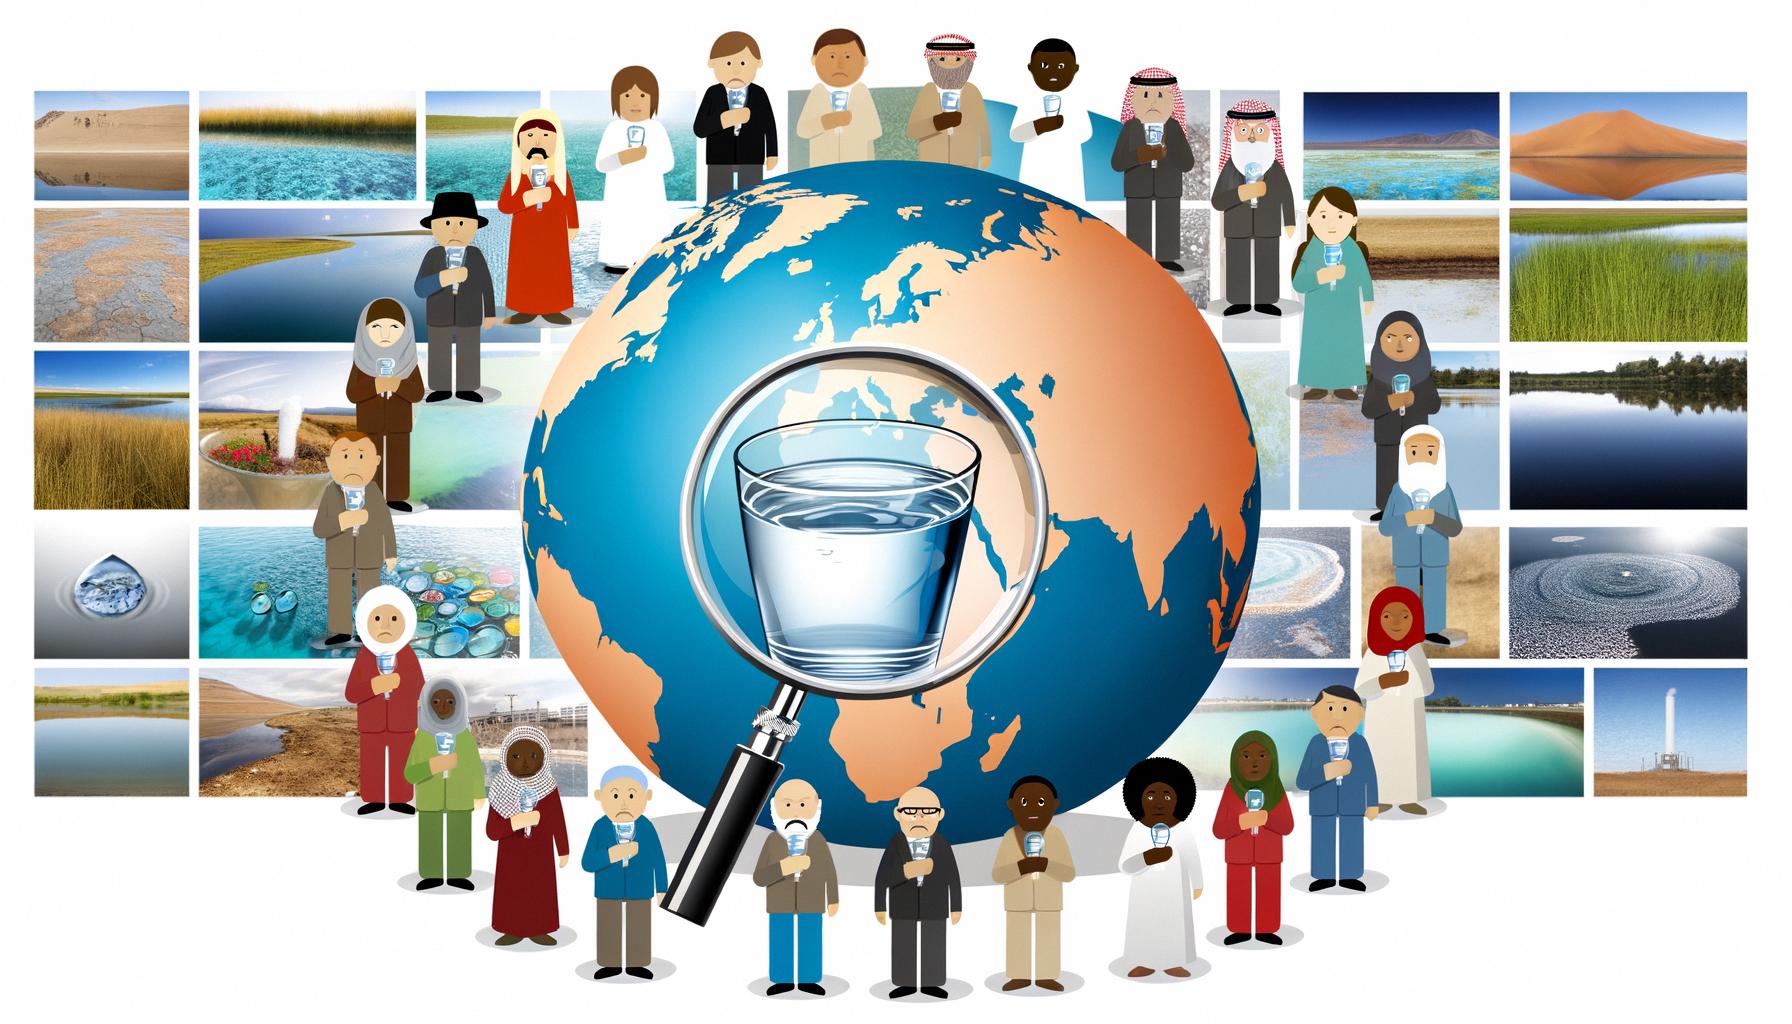 Increasing contaminants and warming of water sources threaten public health globally.